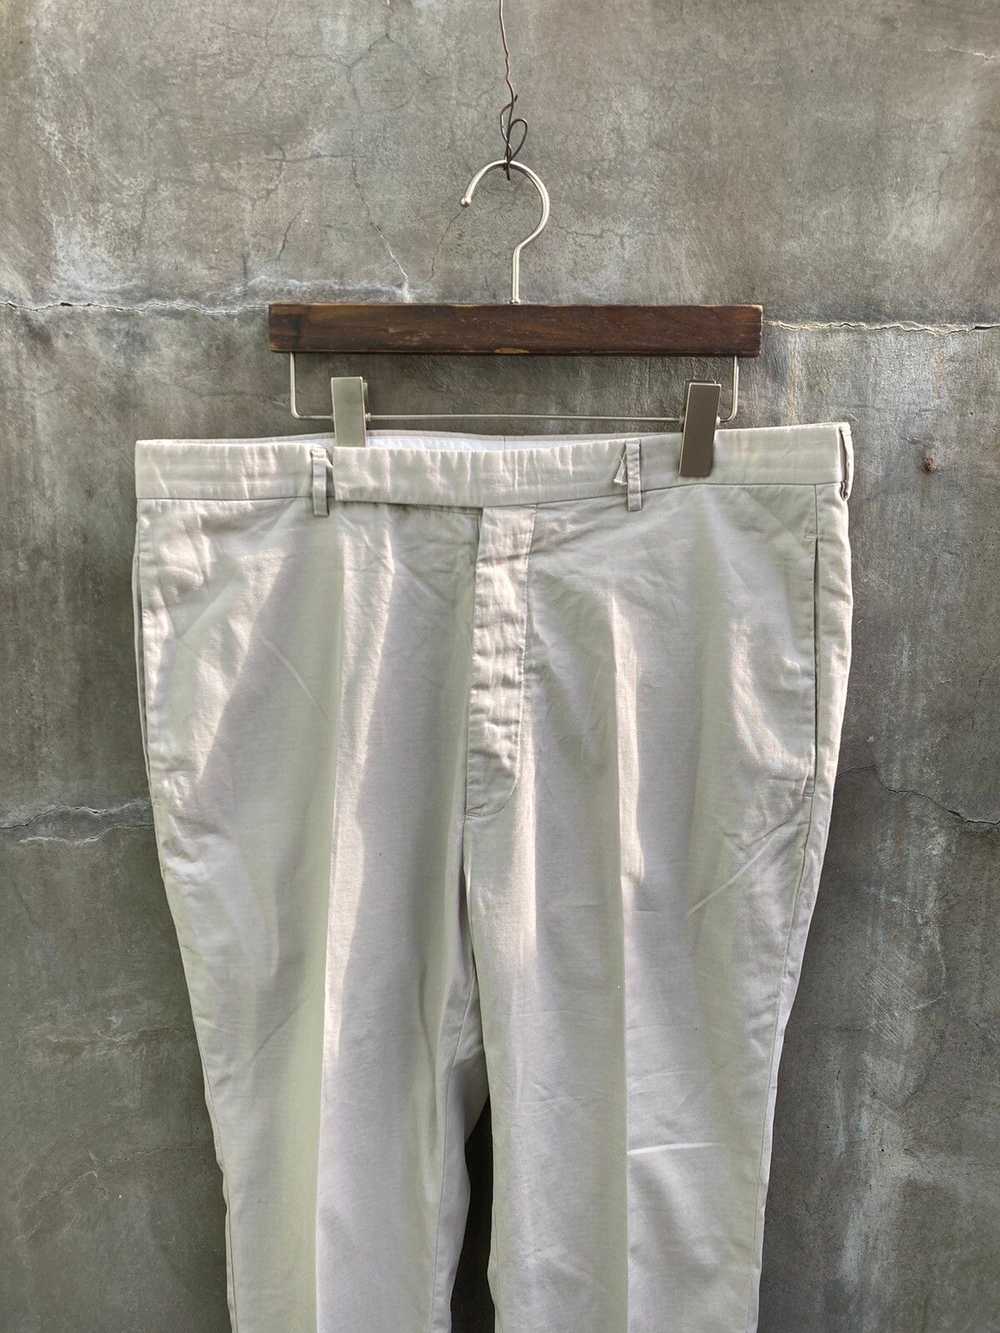 Rick Owens SS19 Babel Oyster Cotton Trousers - image 4